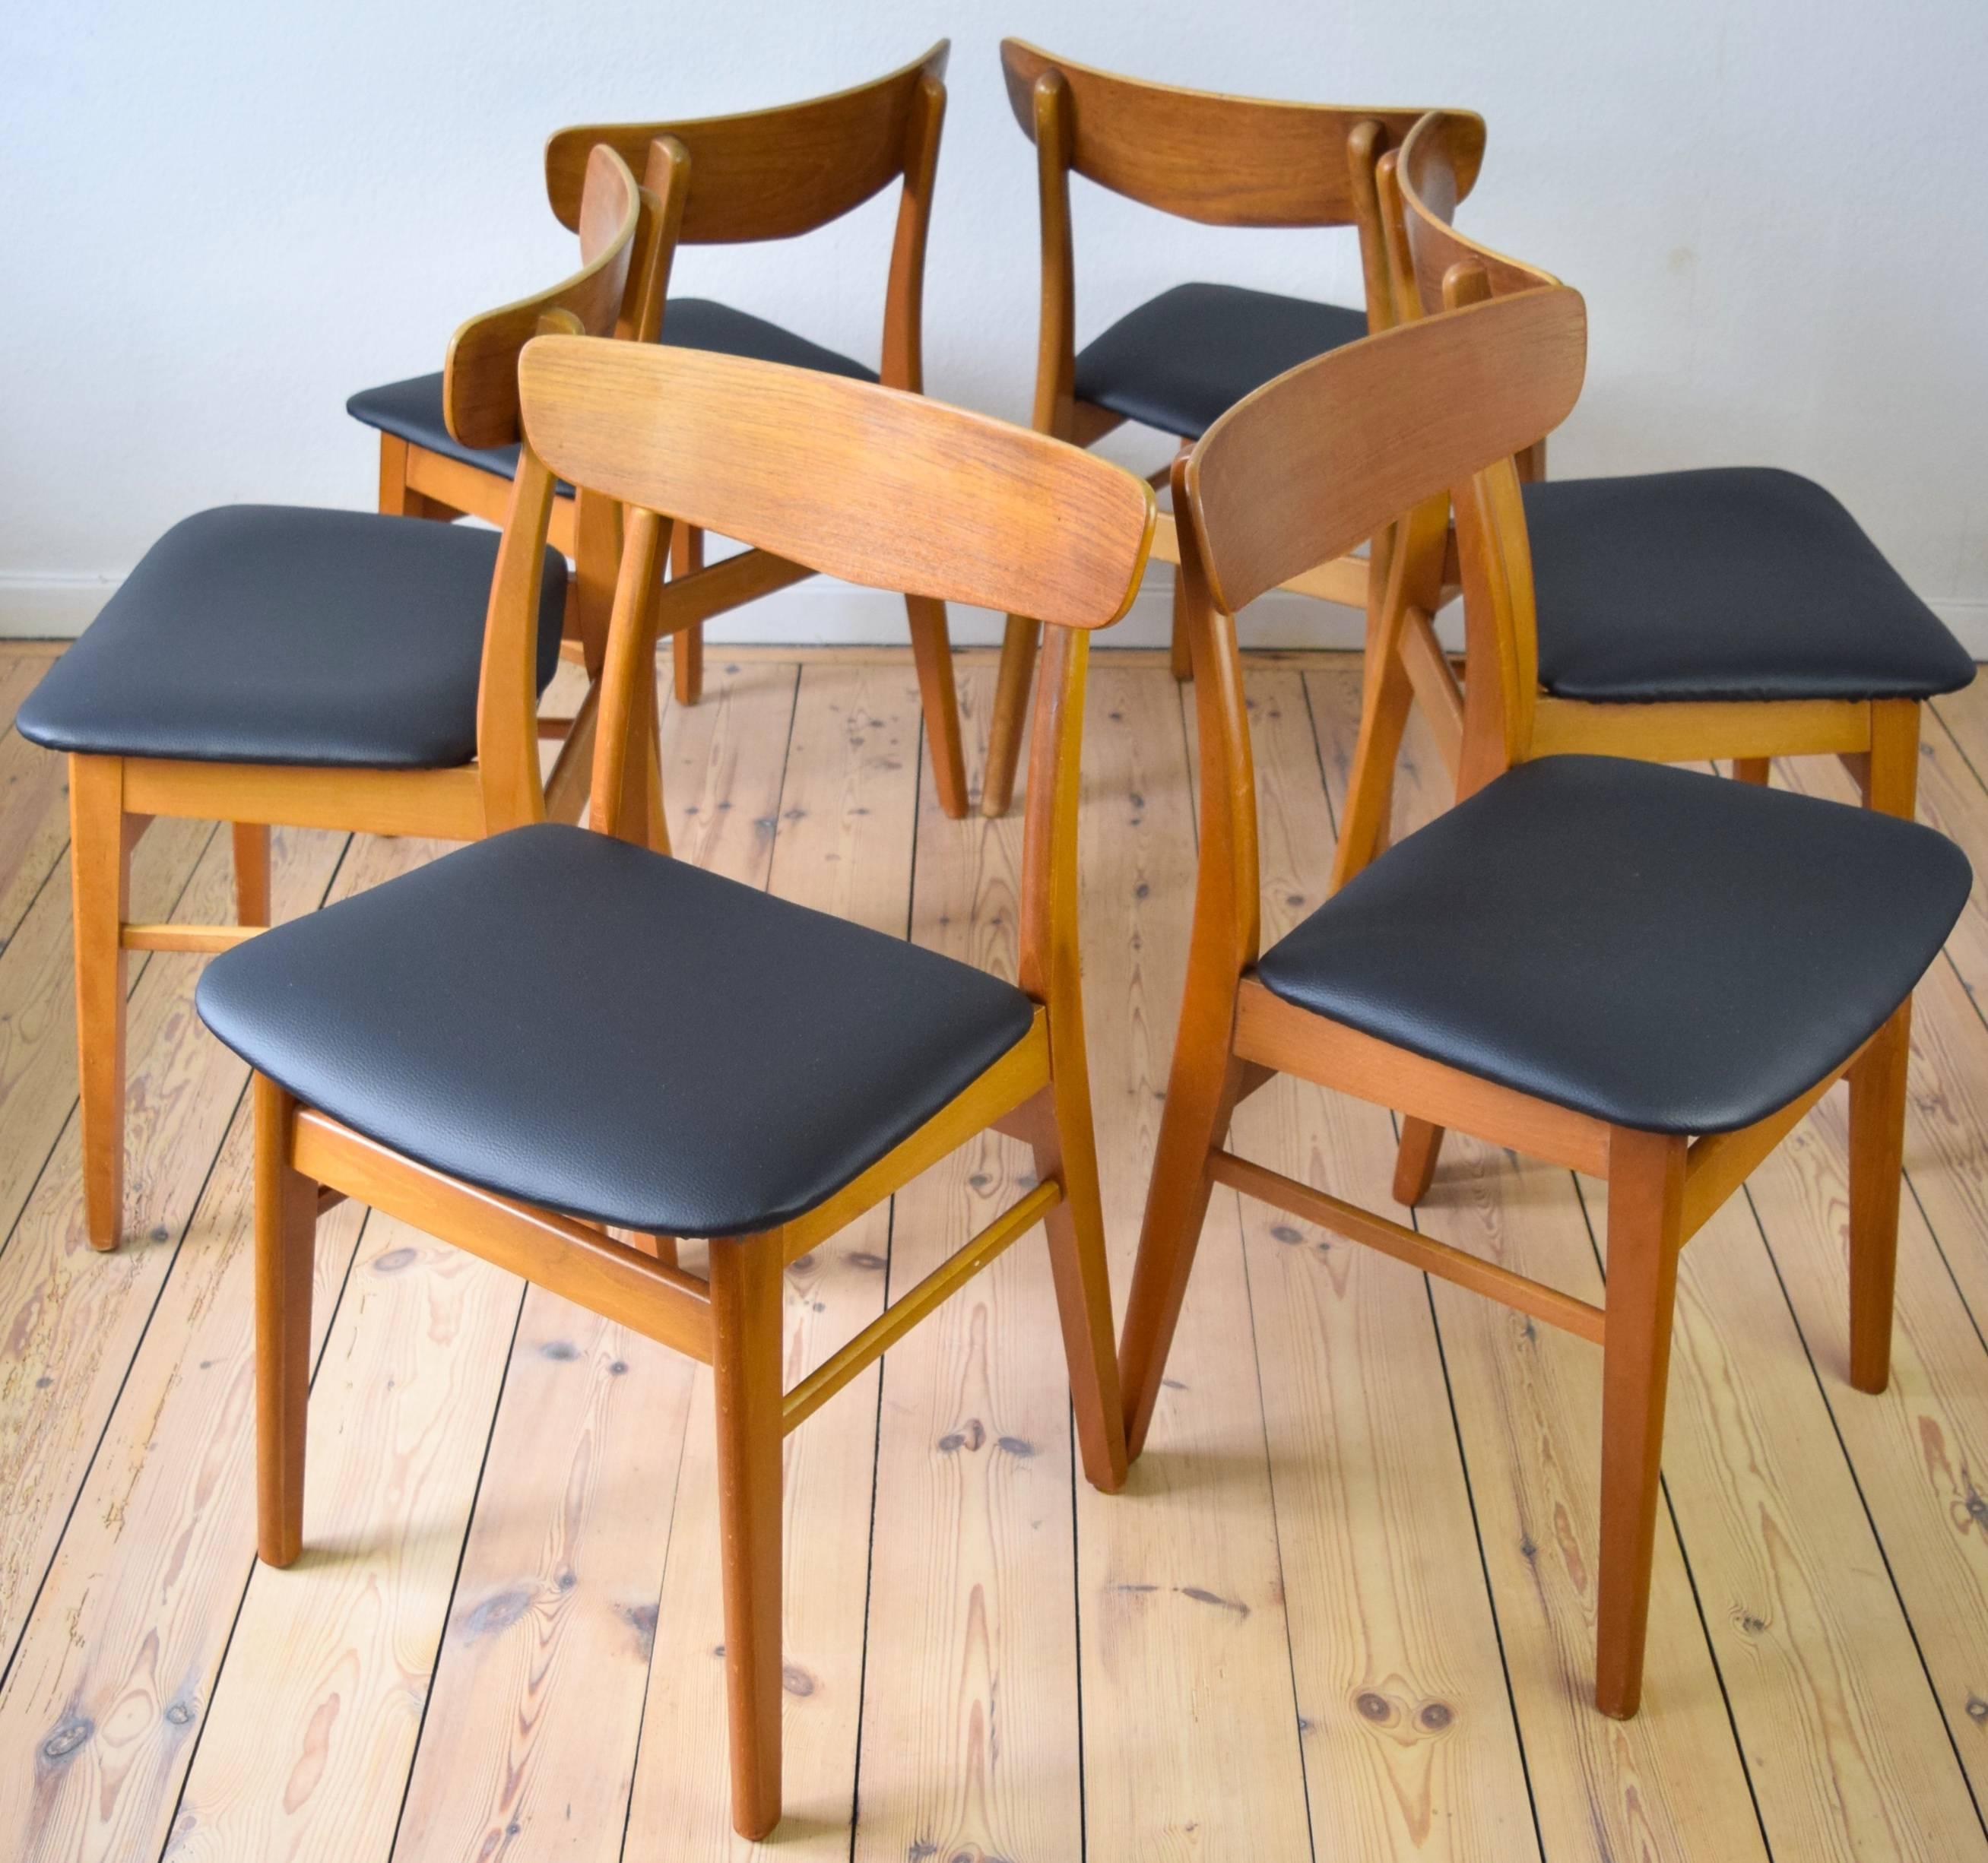 Beautifully restored V back dining chairs by Farstrup. A great Danish Classic that stands the test of time. A perfect addition to the home with warm tones and neutral colors. Simple design in beech and teak. Newly restored.